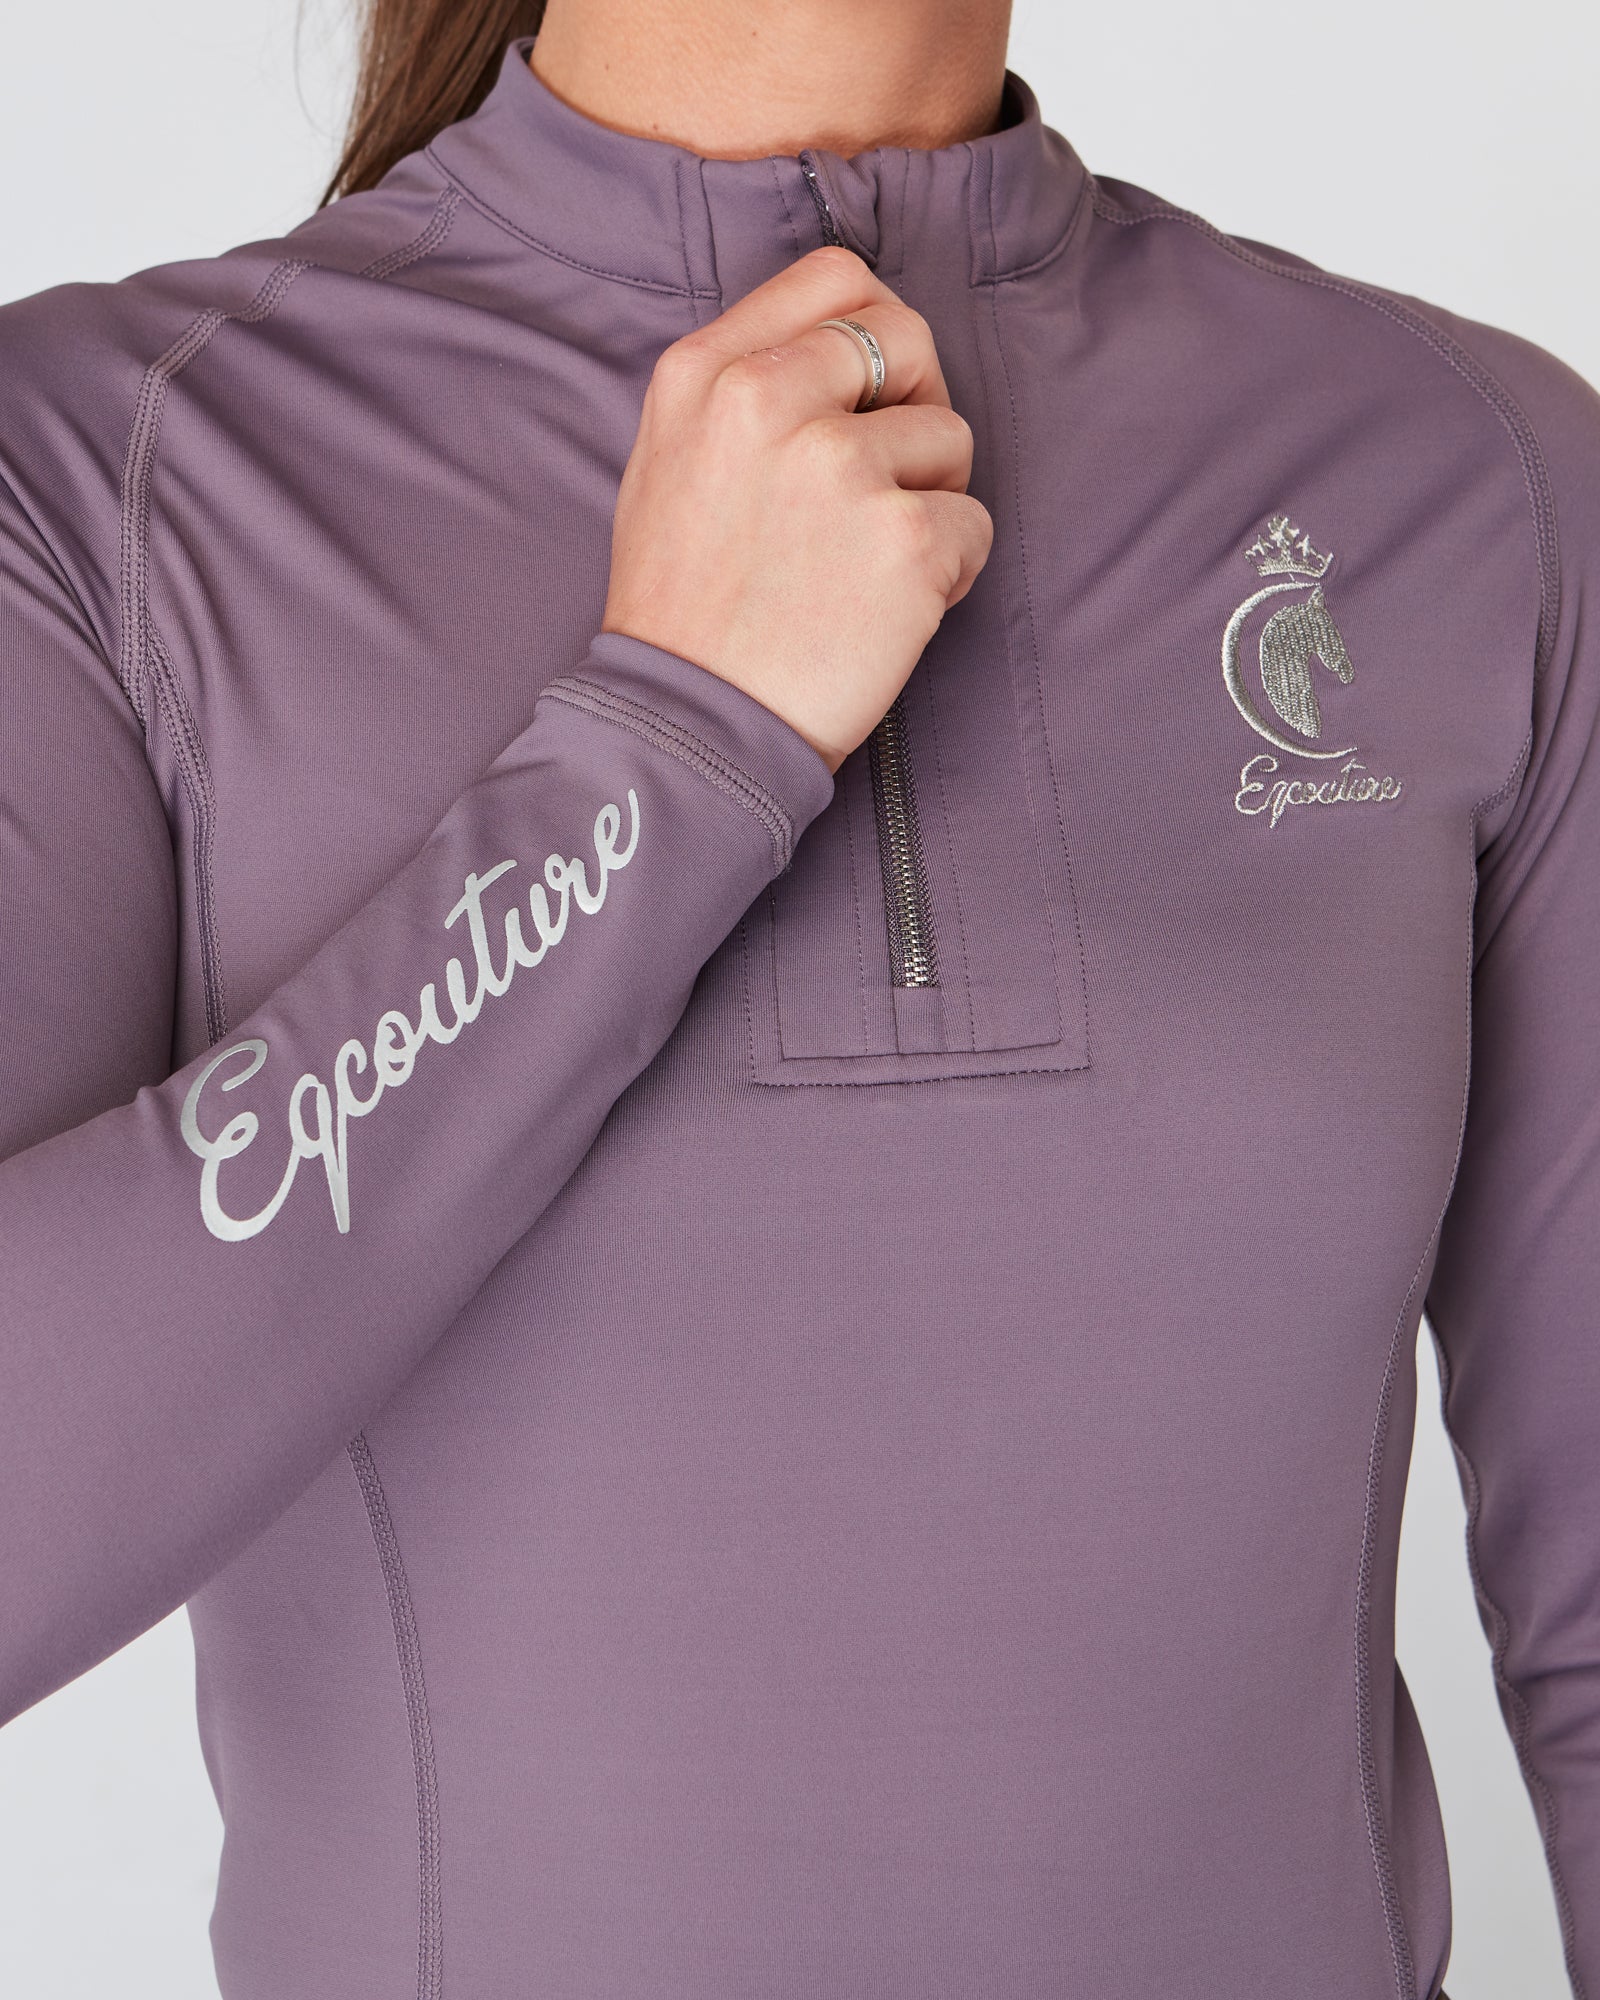 Equestrian mauve long sleeve riding top / base layer / sports riding top- Eqcouture.